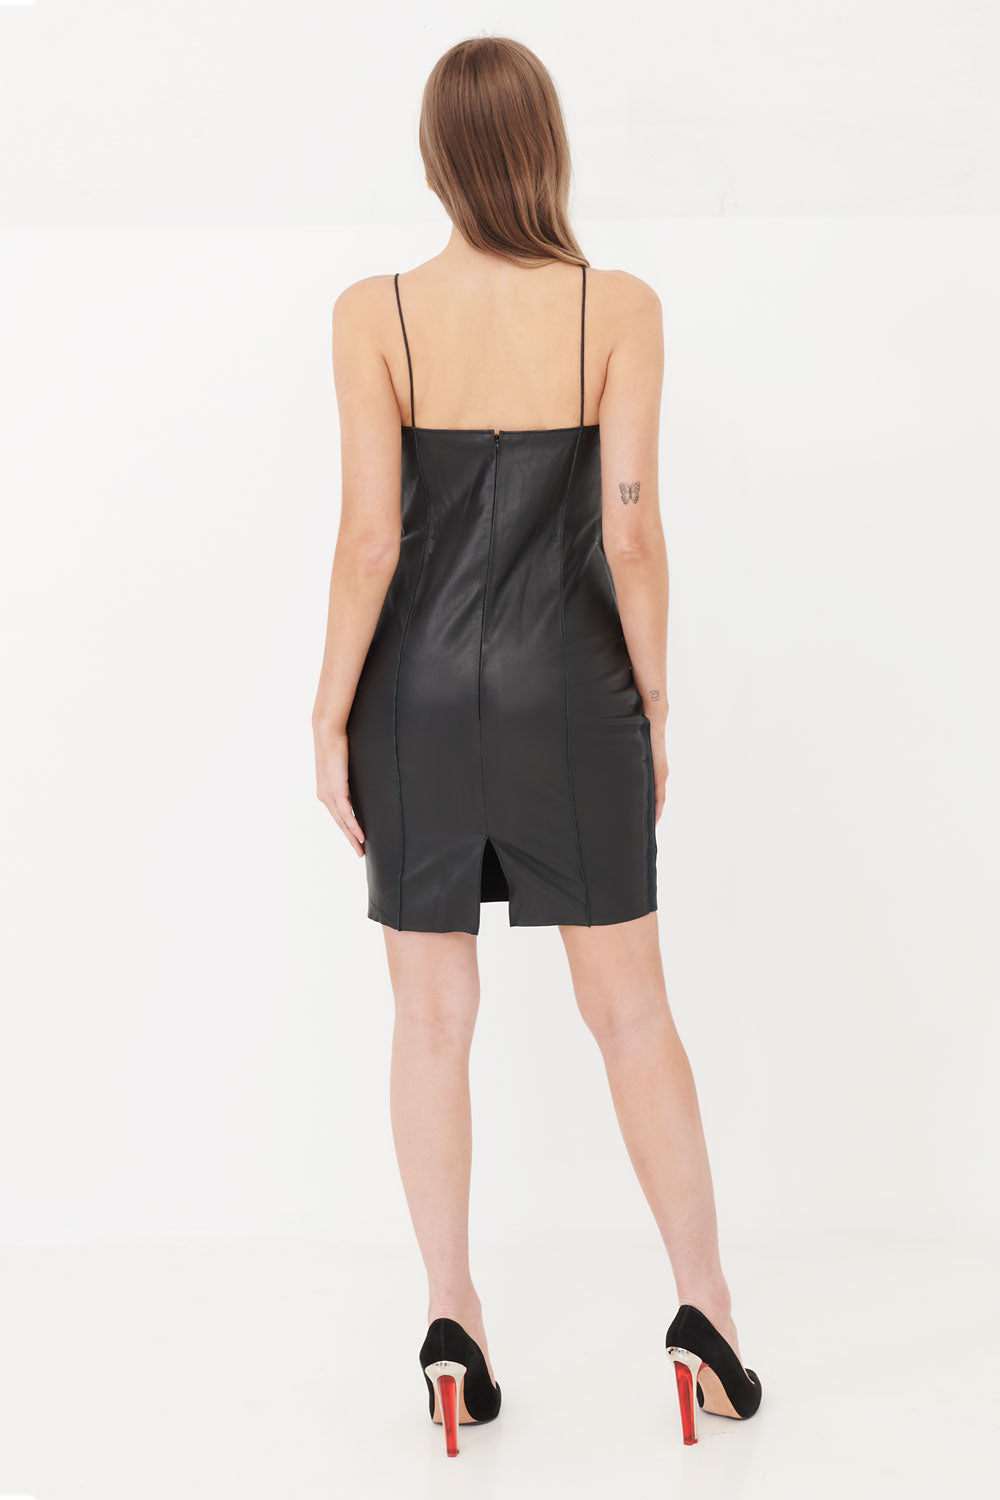 The First Date Leather Dress - Black